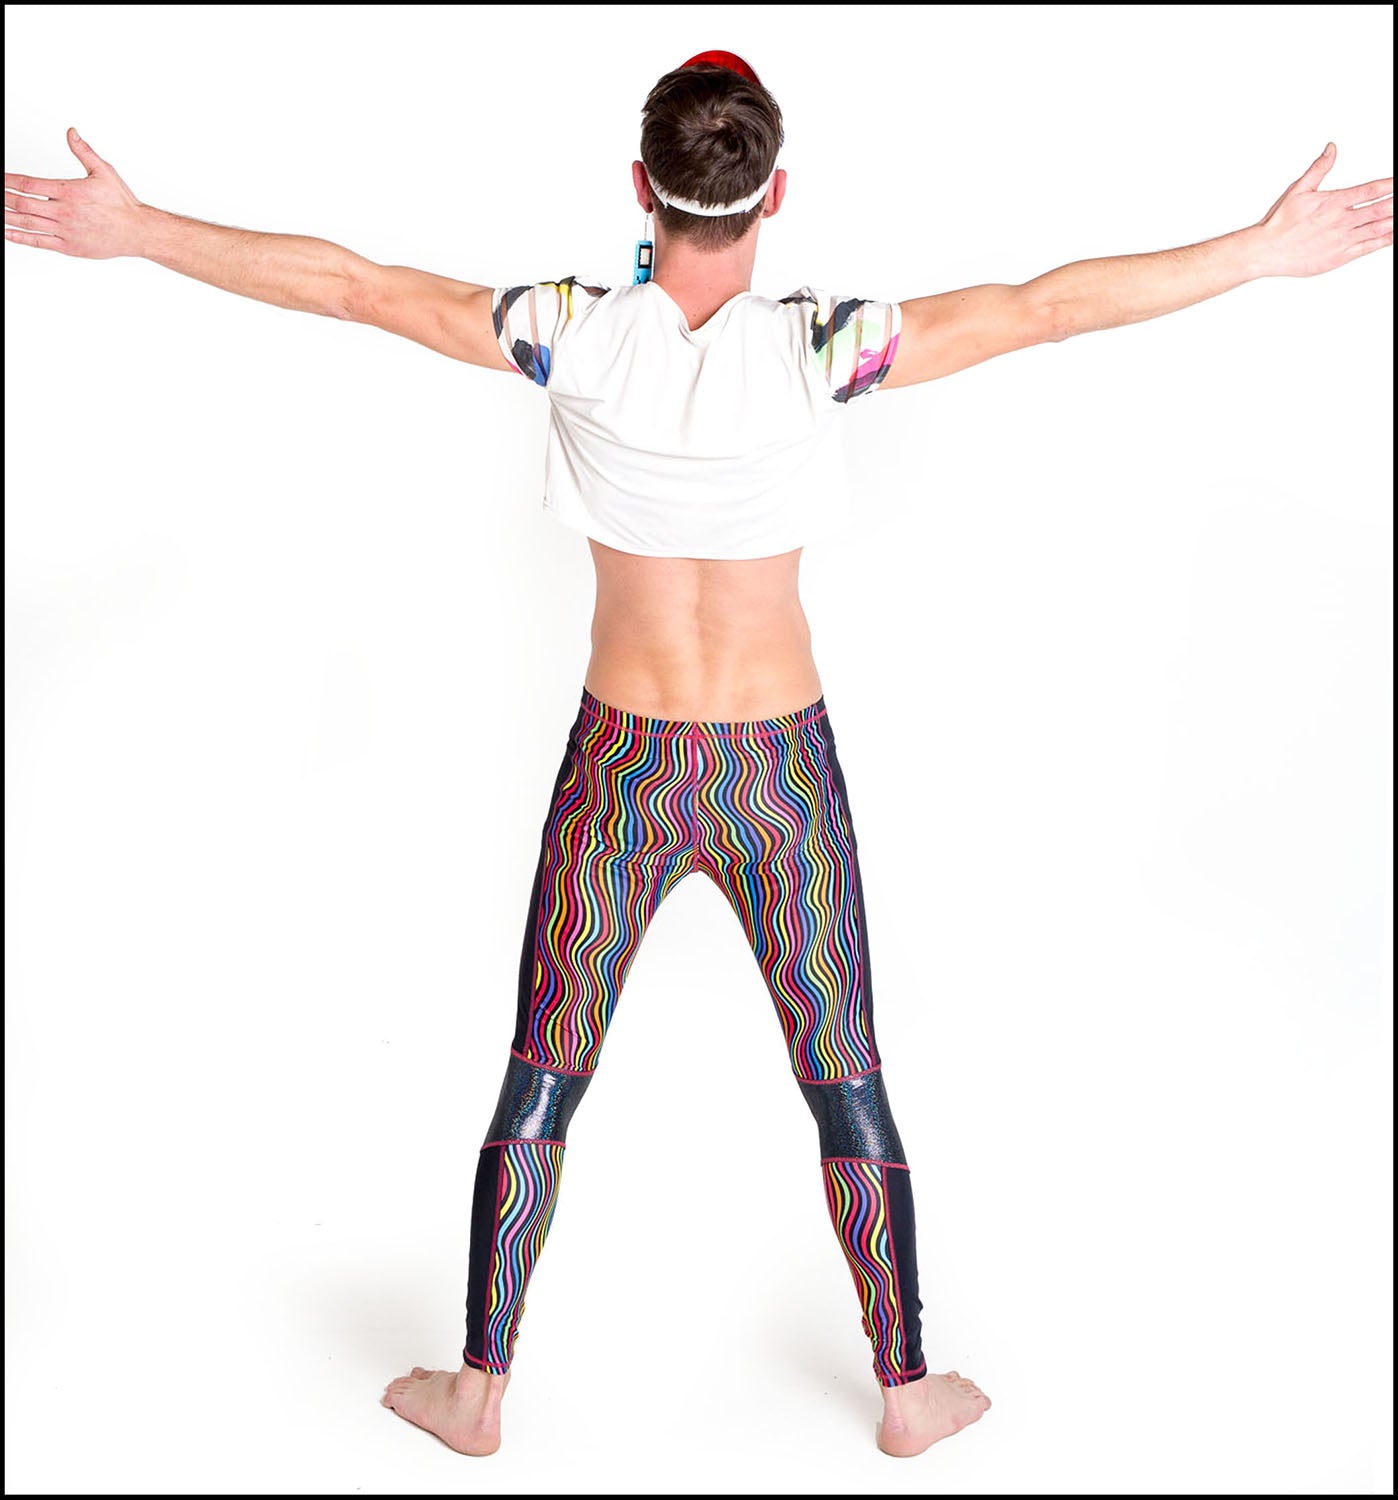 Twisted Leggings, a handmade-to-order piece in rainbow groovy stripe printed spandex. These funky leggings are both stylish and sustainable. The unisex design features a high elasticated waistband and black hologram knee and side panels.